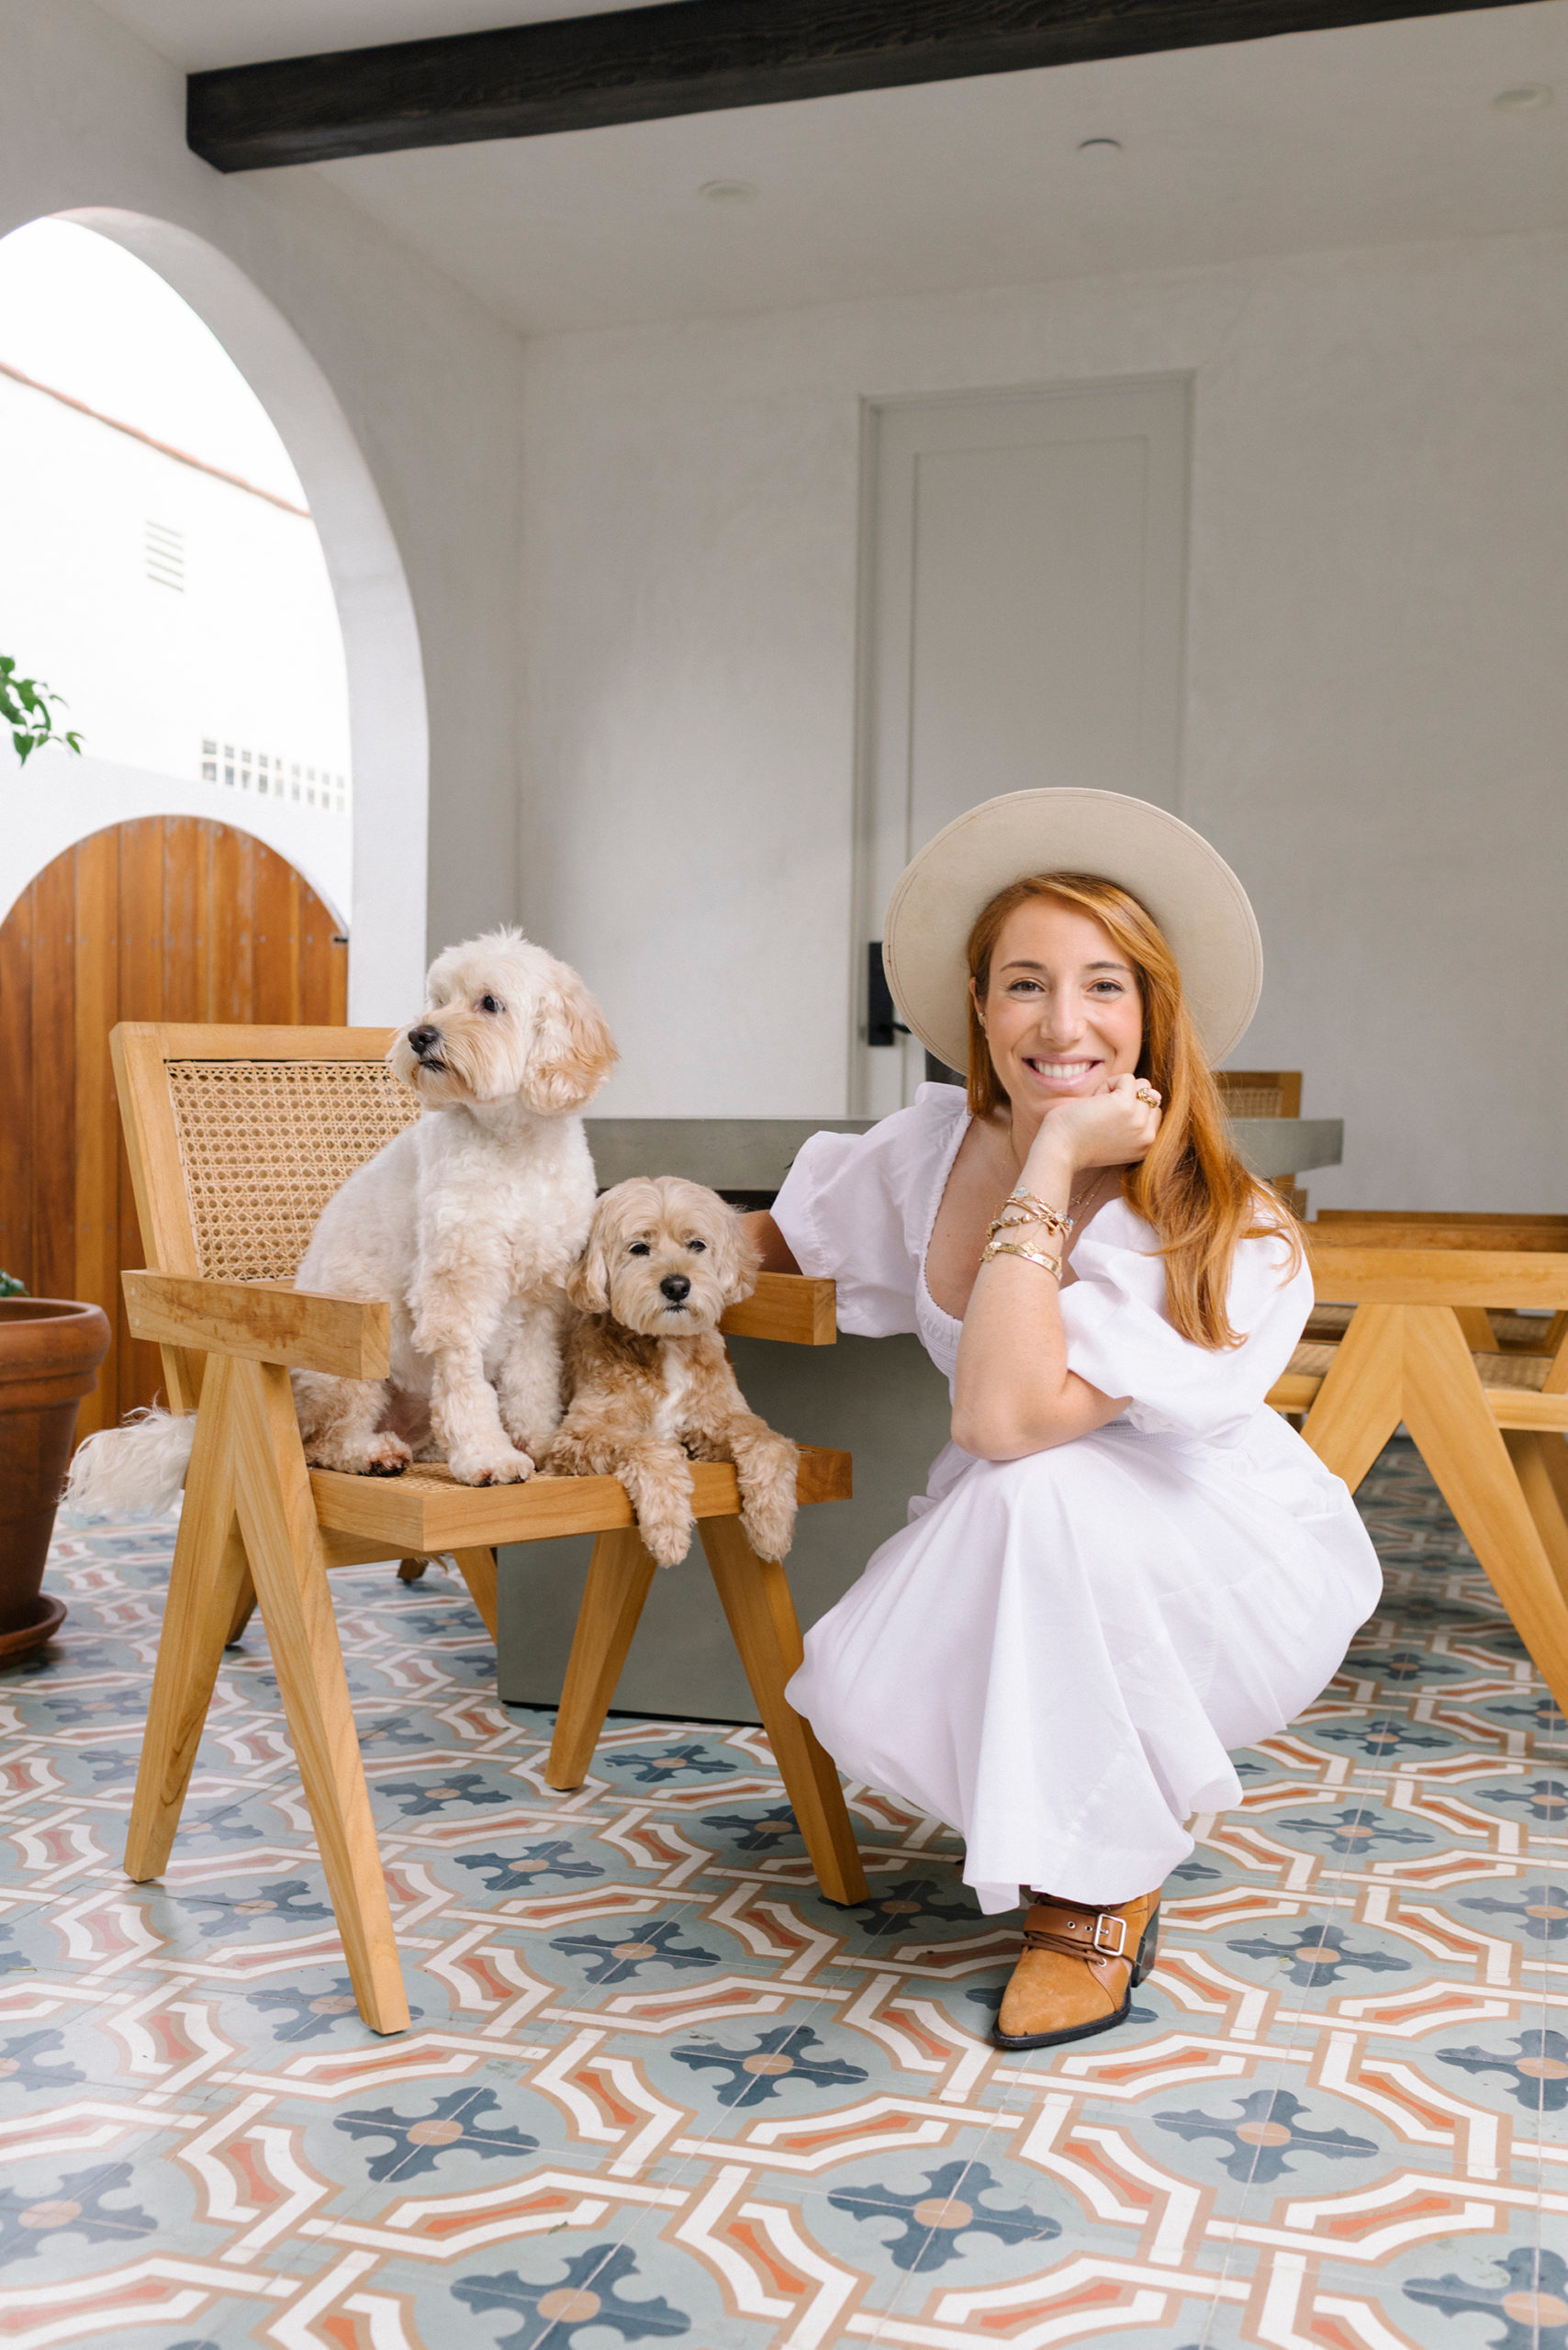 West-Bourne chef and restauranteur Camilla Marcus and her Cockapoo dogs, Teddy and Charlie.